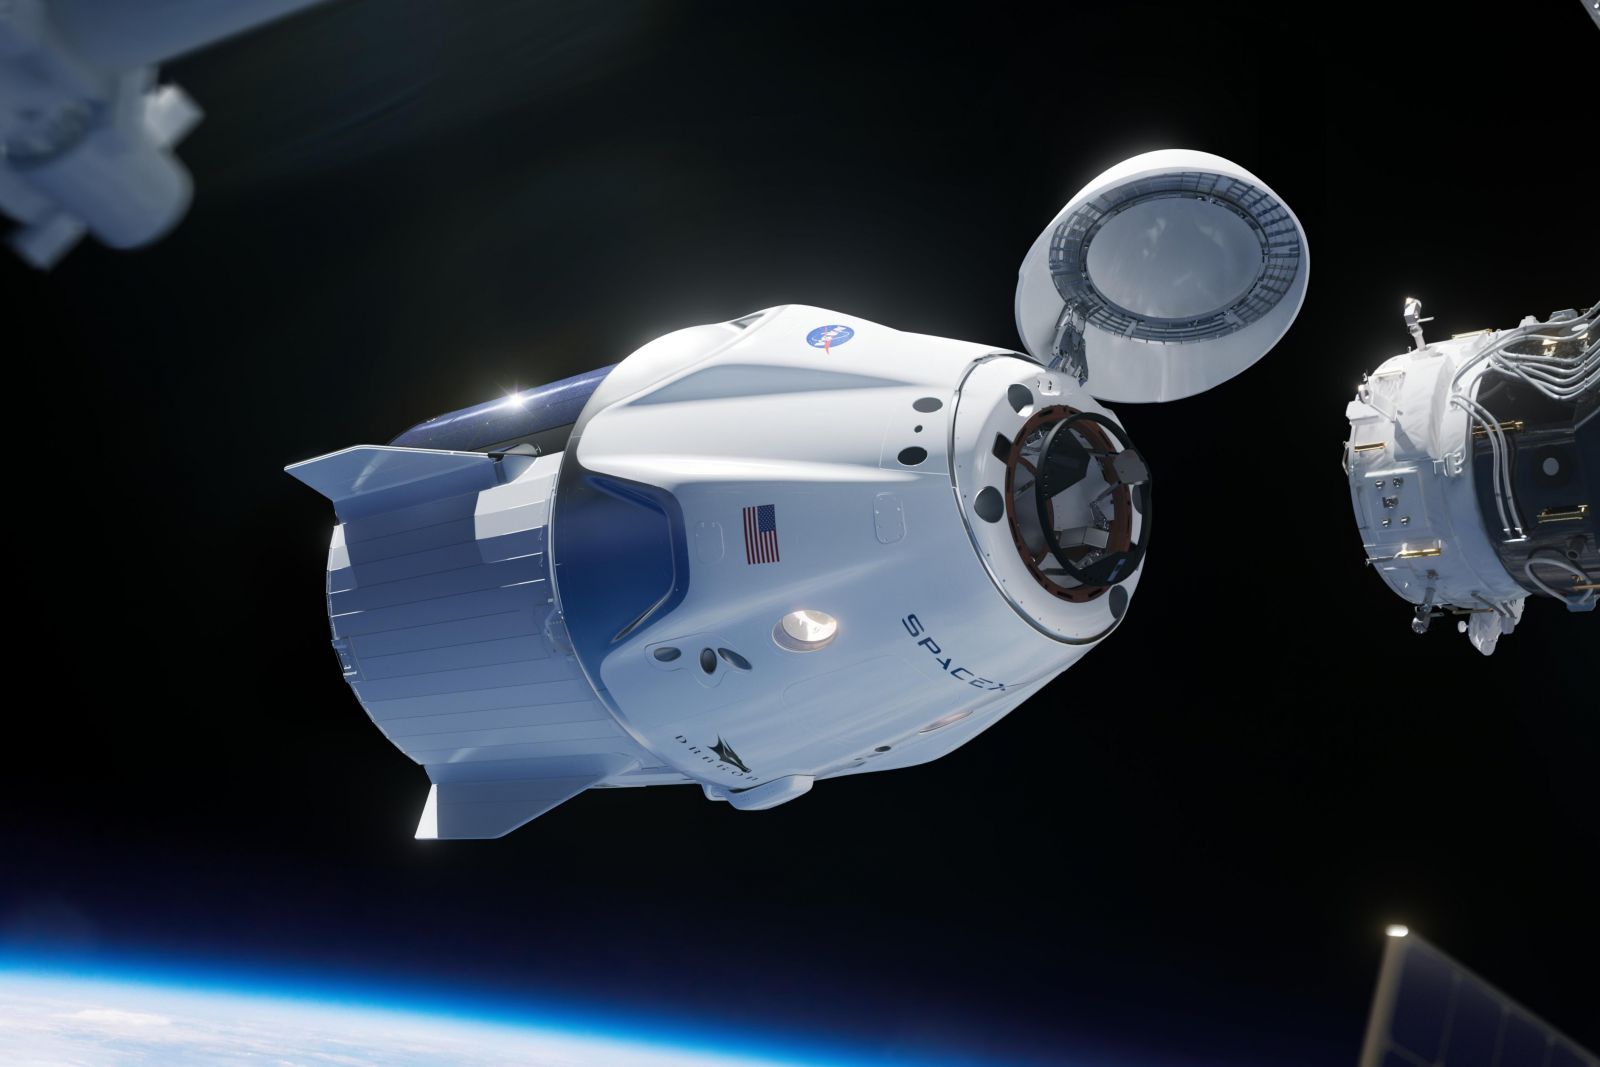 https://racurs.ua/content/images/Publication/News/13/88/38/content/SpaceX_Crew_Dragon_(More_cropped).jpg